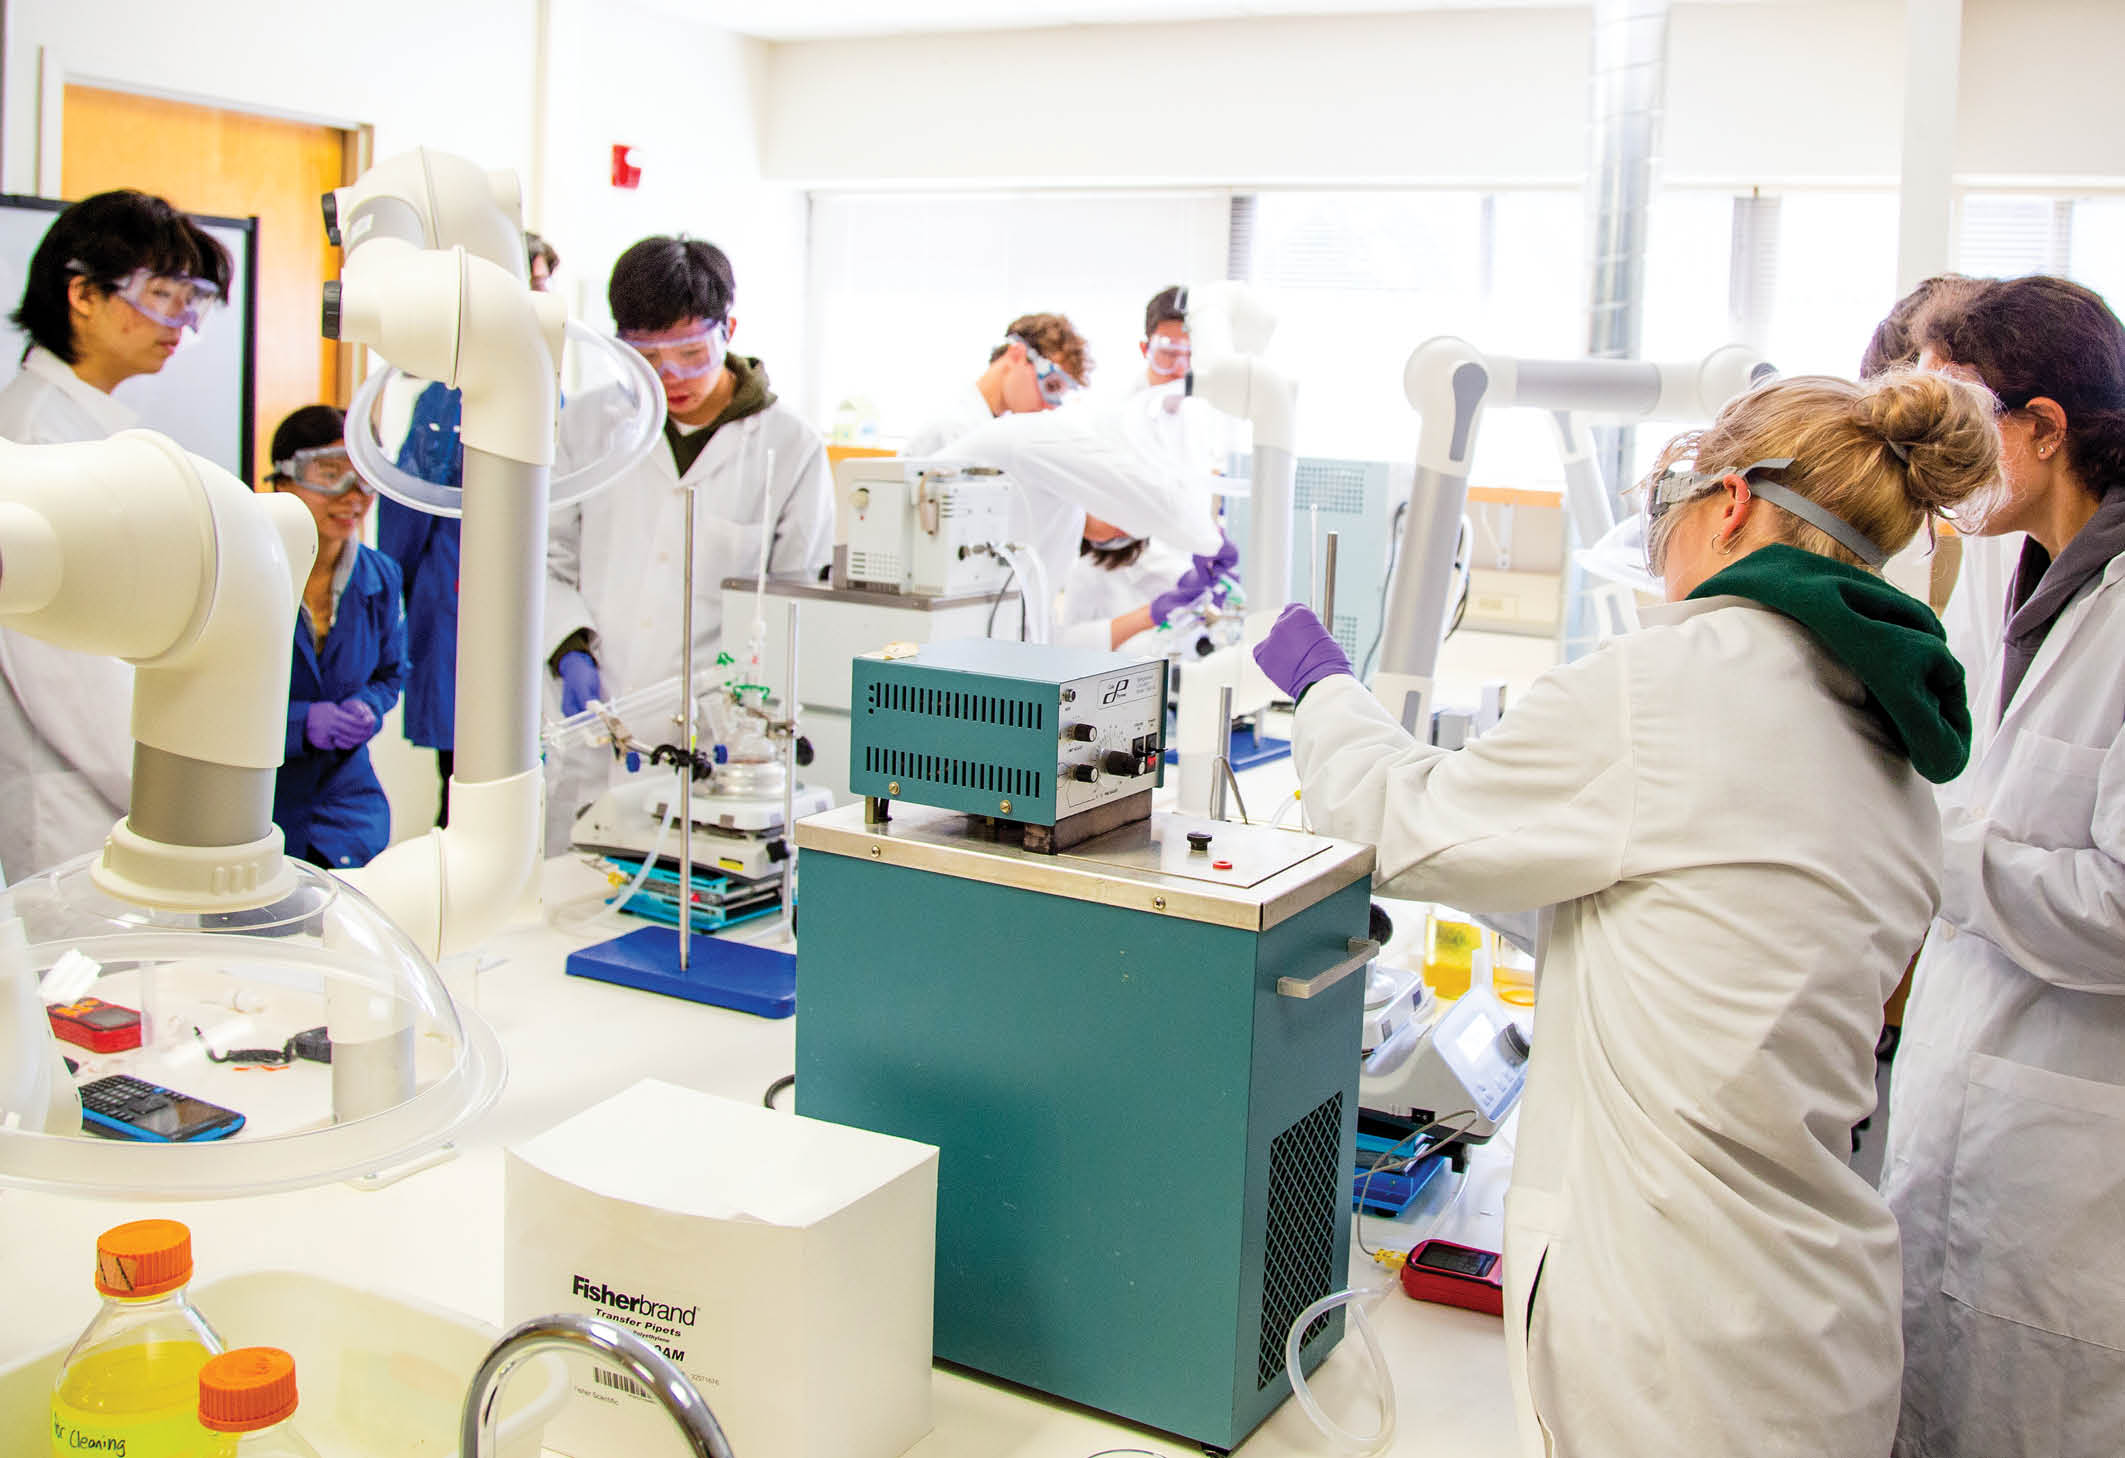 Students in lab wearing lab coats and running experiments